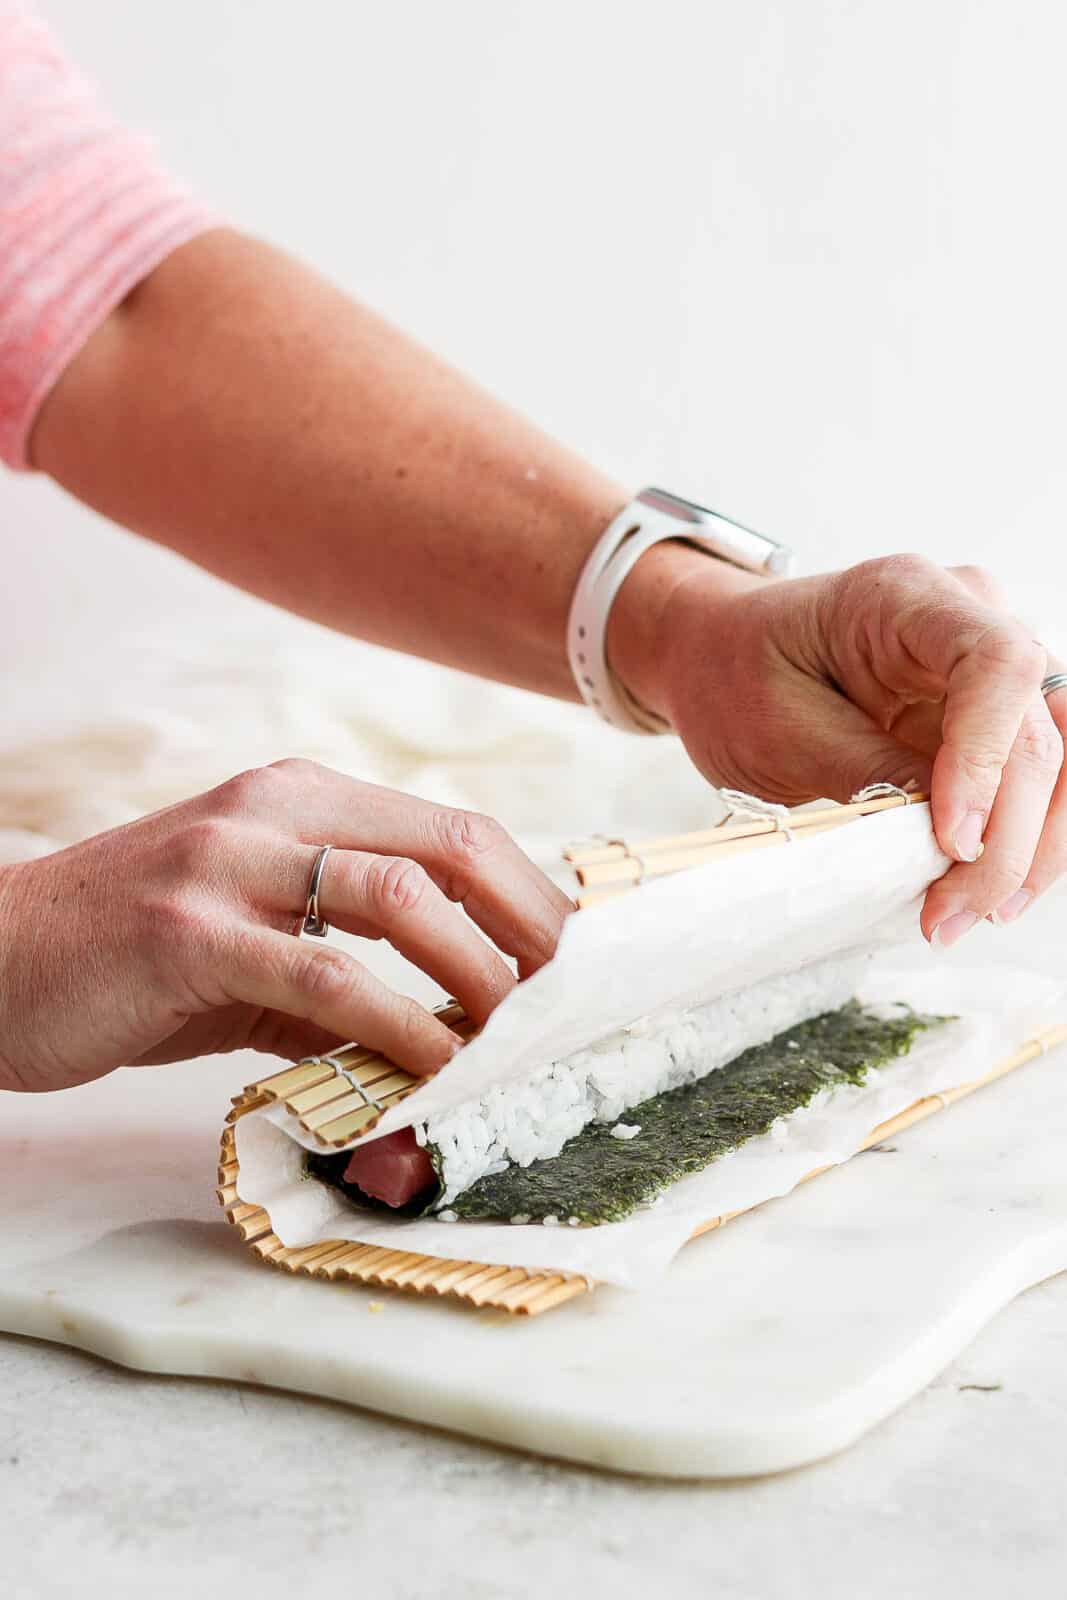 Pulling the bamboo sheet out so that it doesn't get rolled up inside the sushi roll.